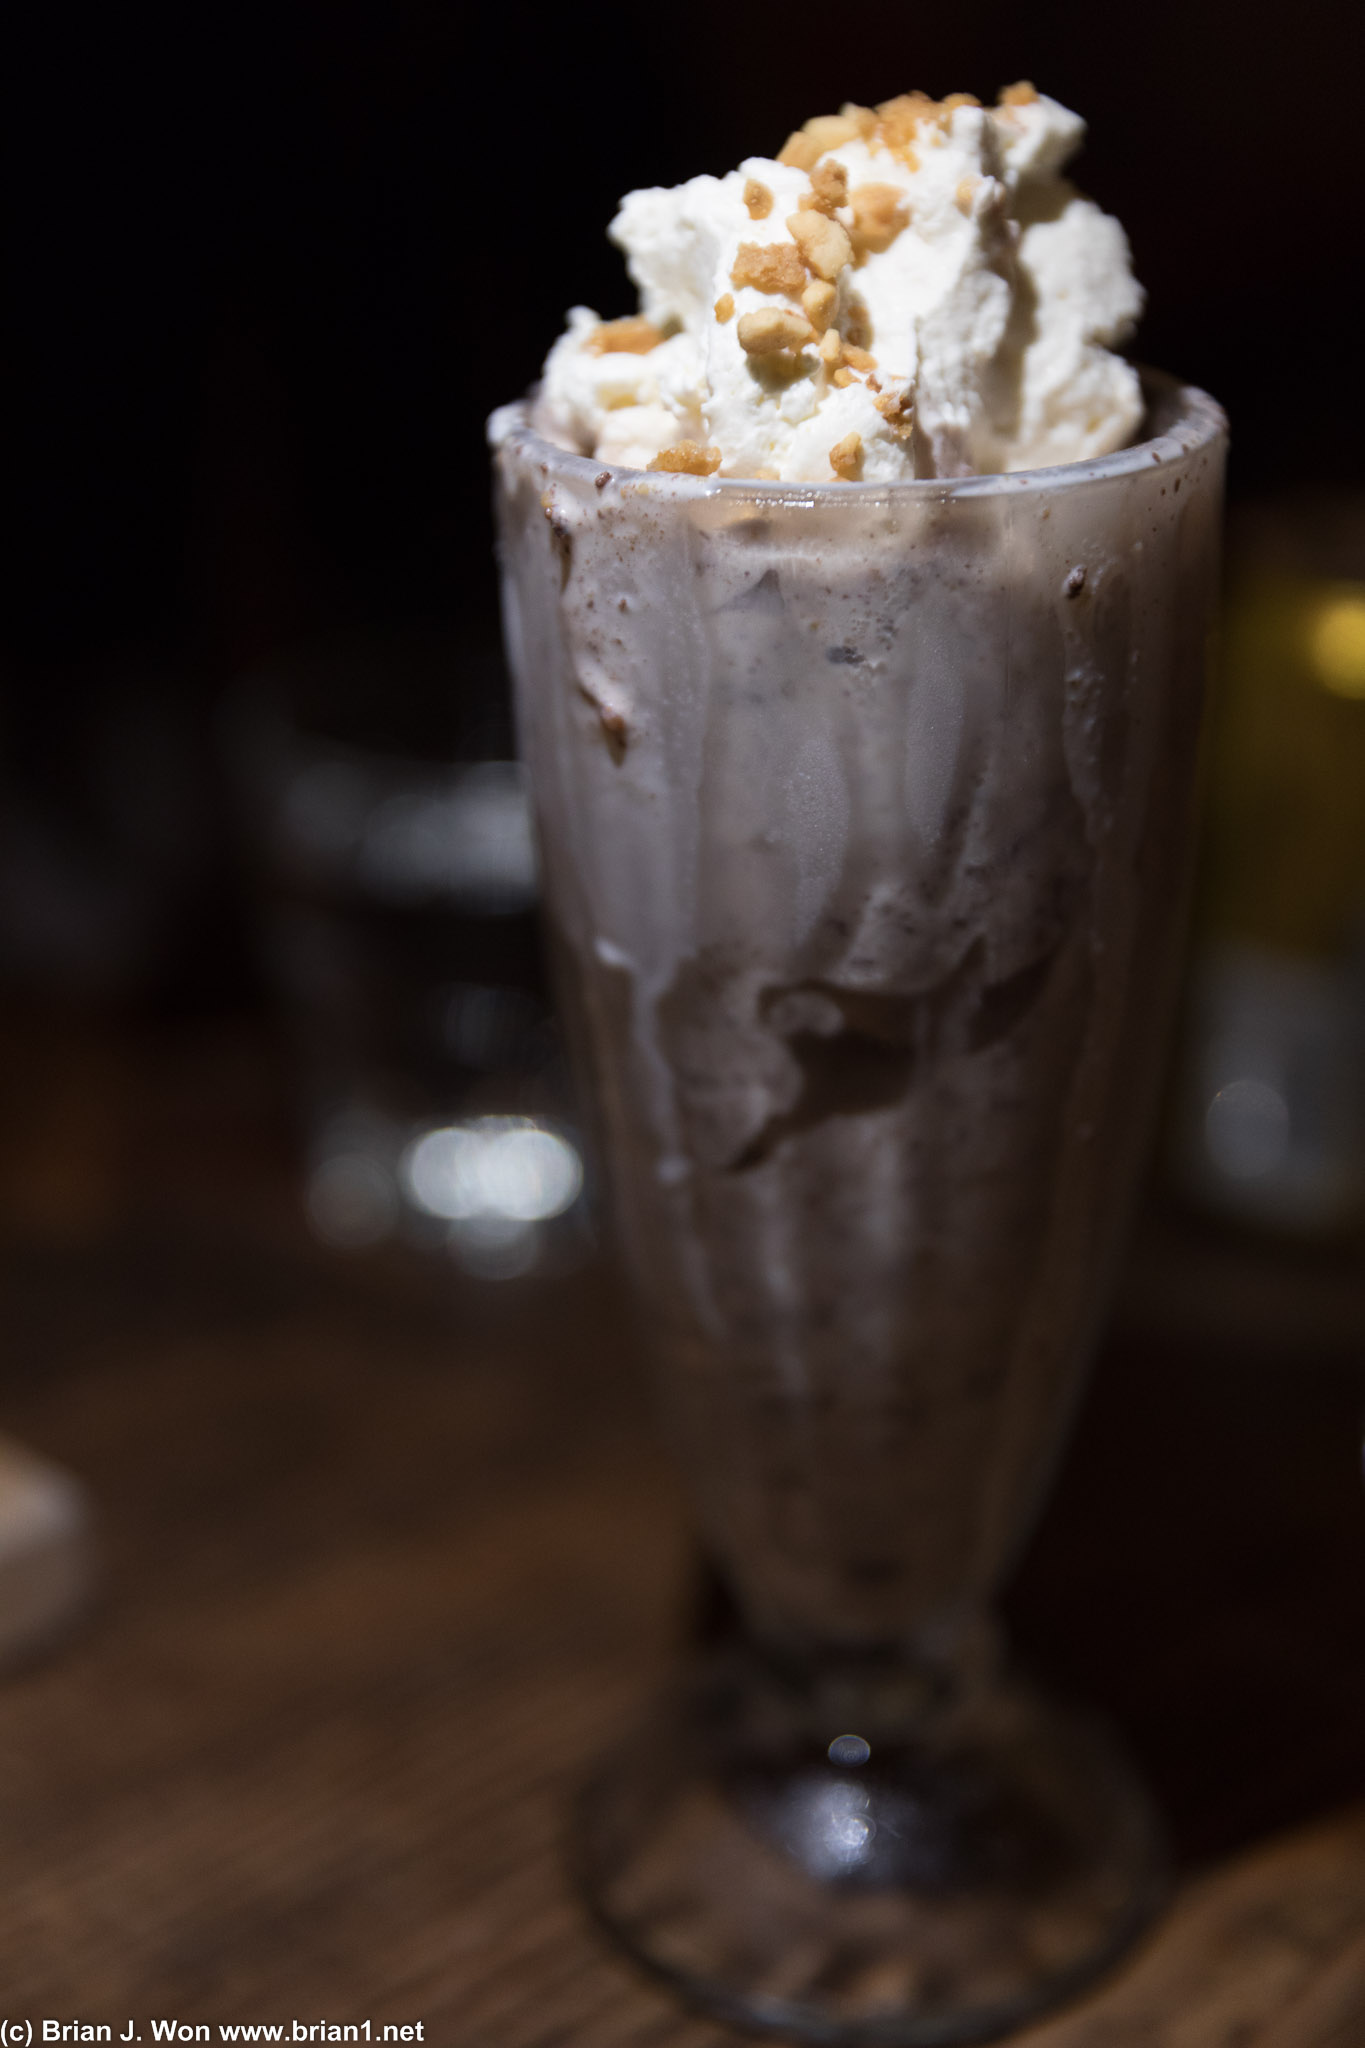 As is the friggin' delicious peanut butter shake.